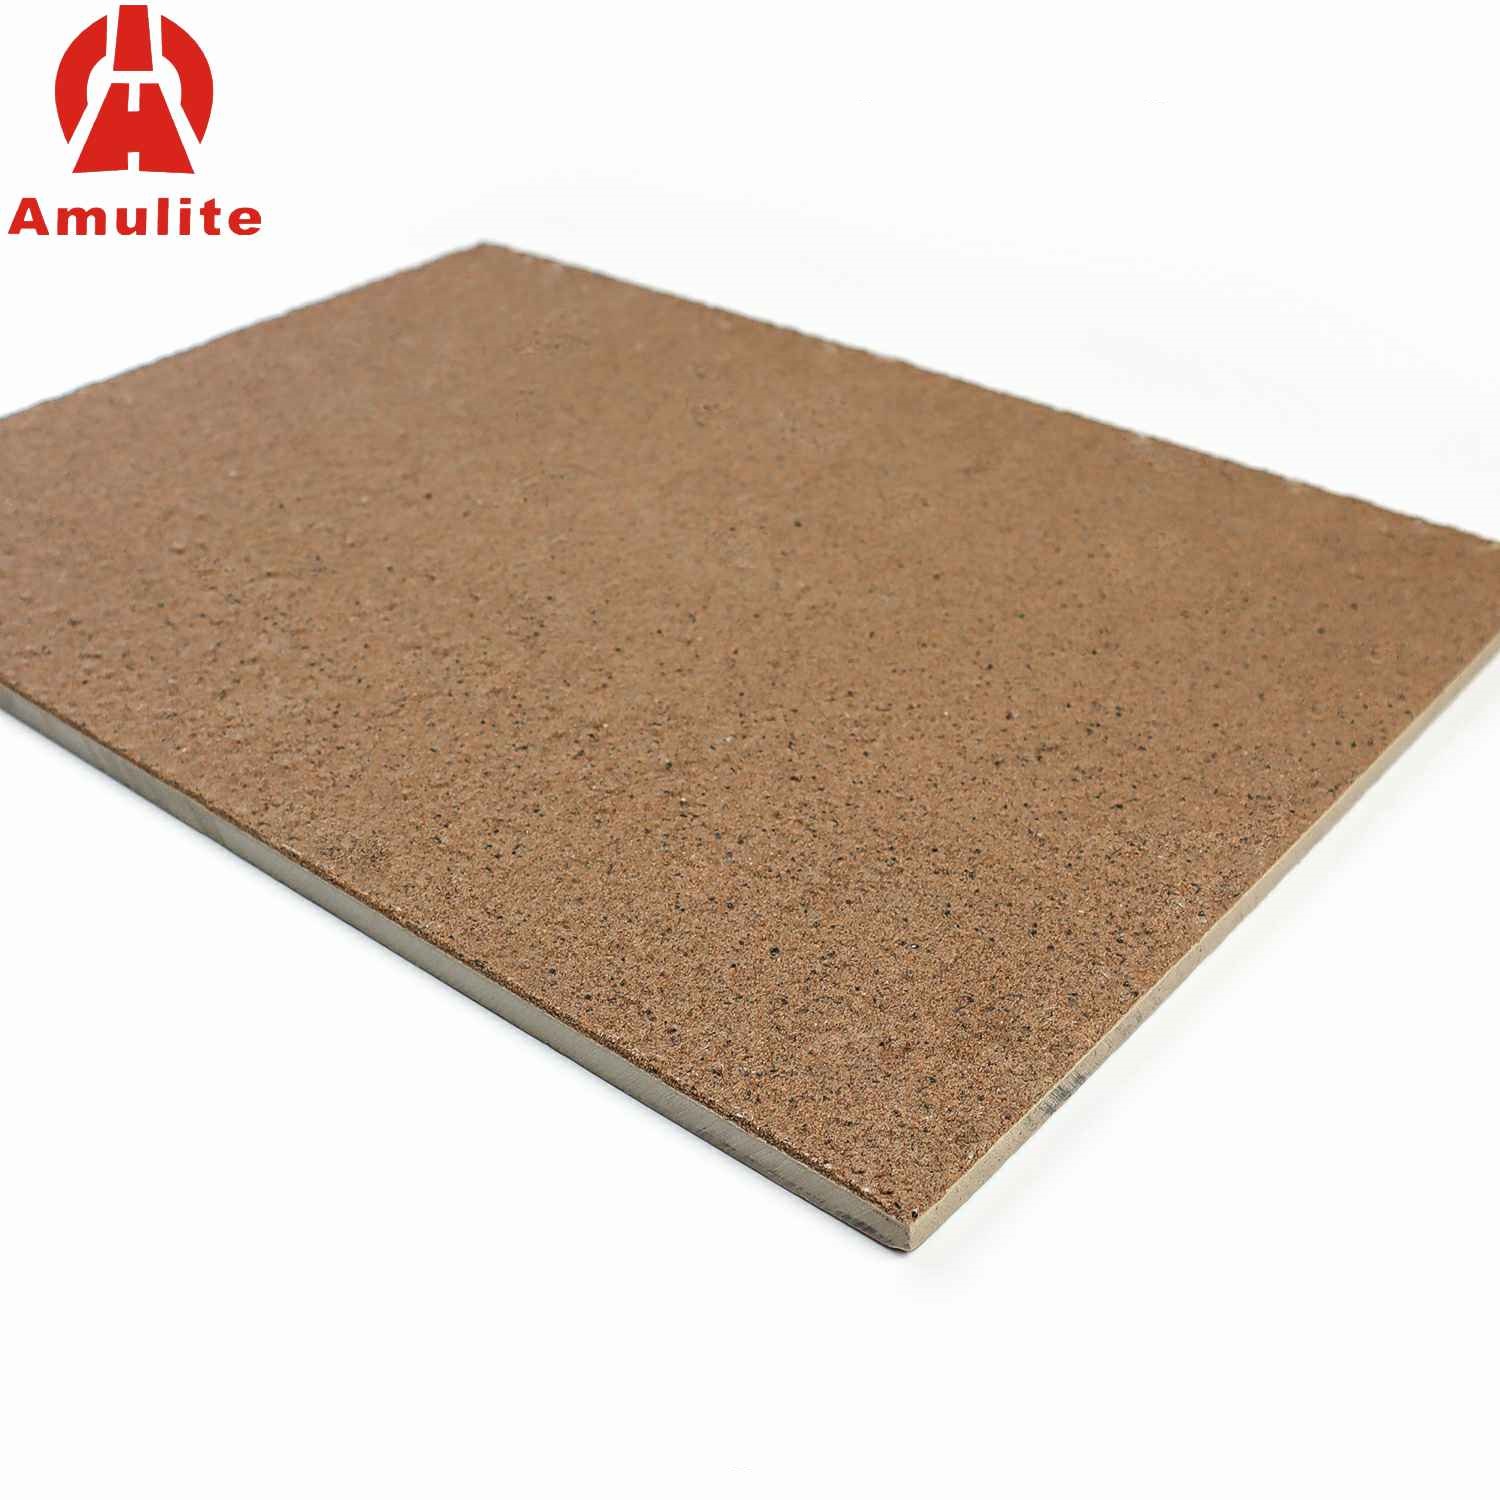 Amulite Real Stone Painting Fiber Cement Board